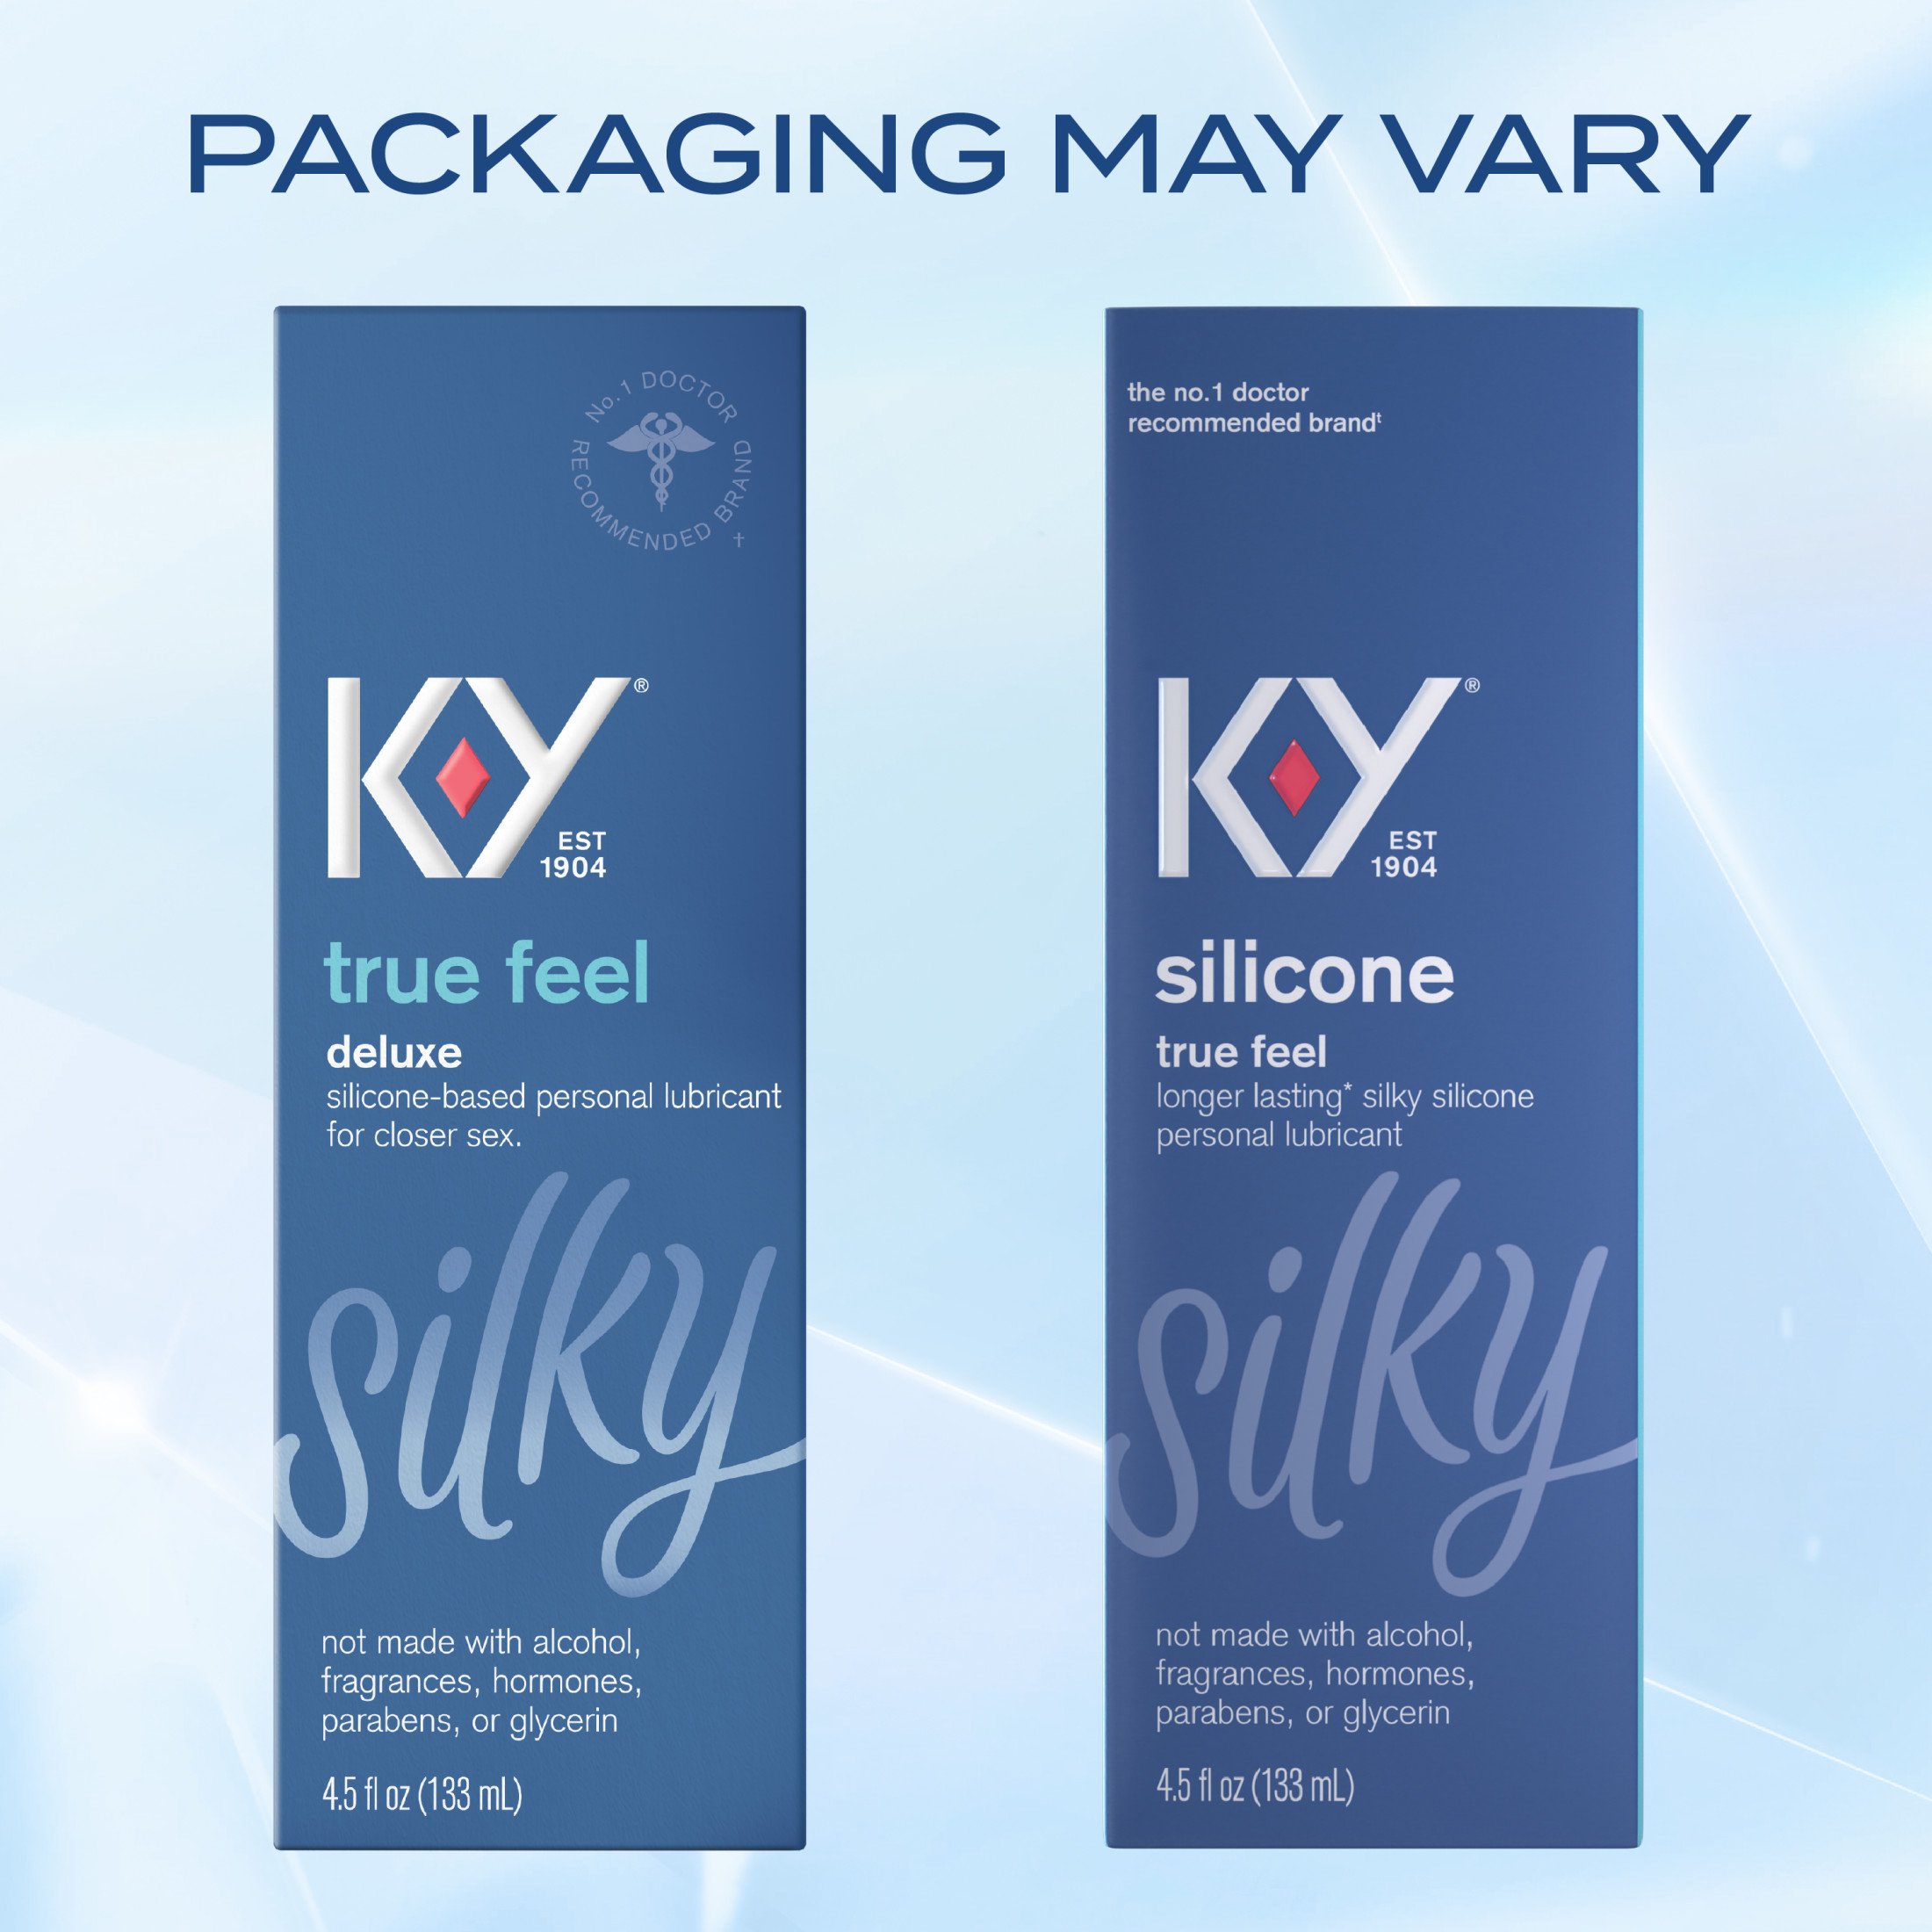 K-Y True Feel Lube, Personal Lubricant, Silicone-Based Formula, Safe to Use with Condoms, For Men, Women and Couples, 4.5 FL OZ - image 2 of 14